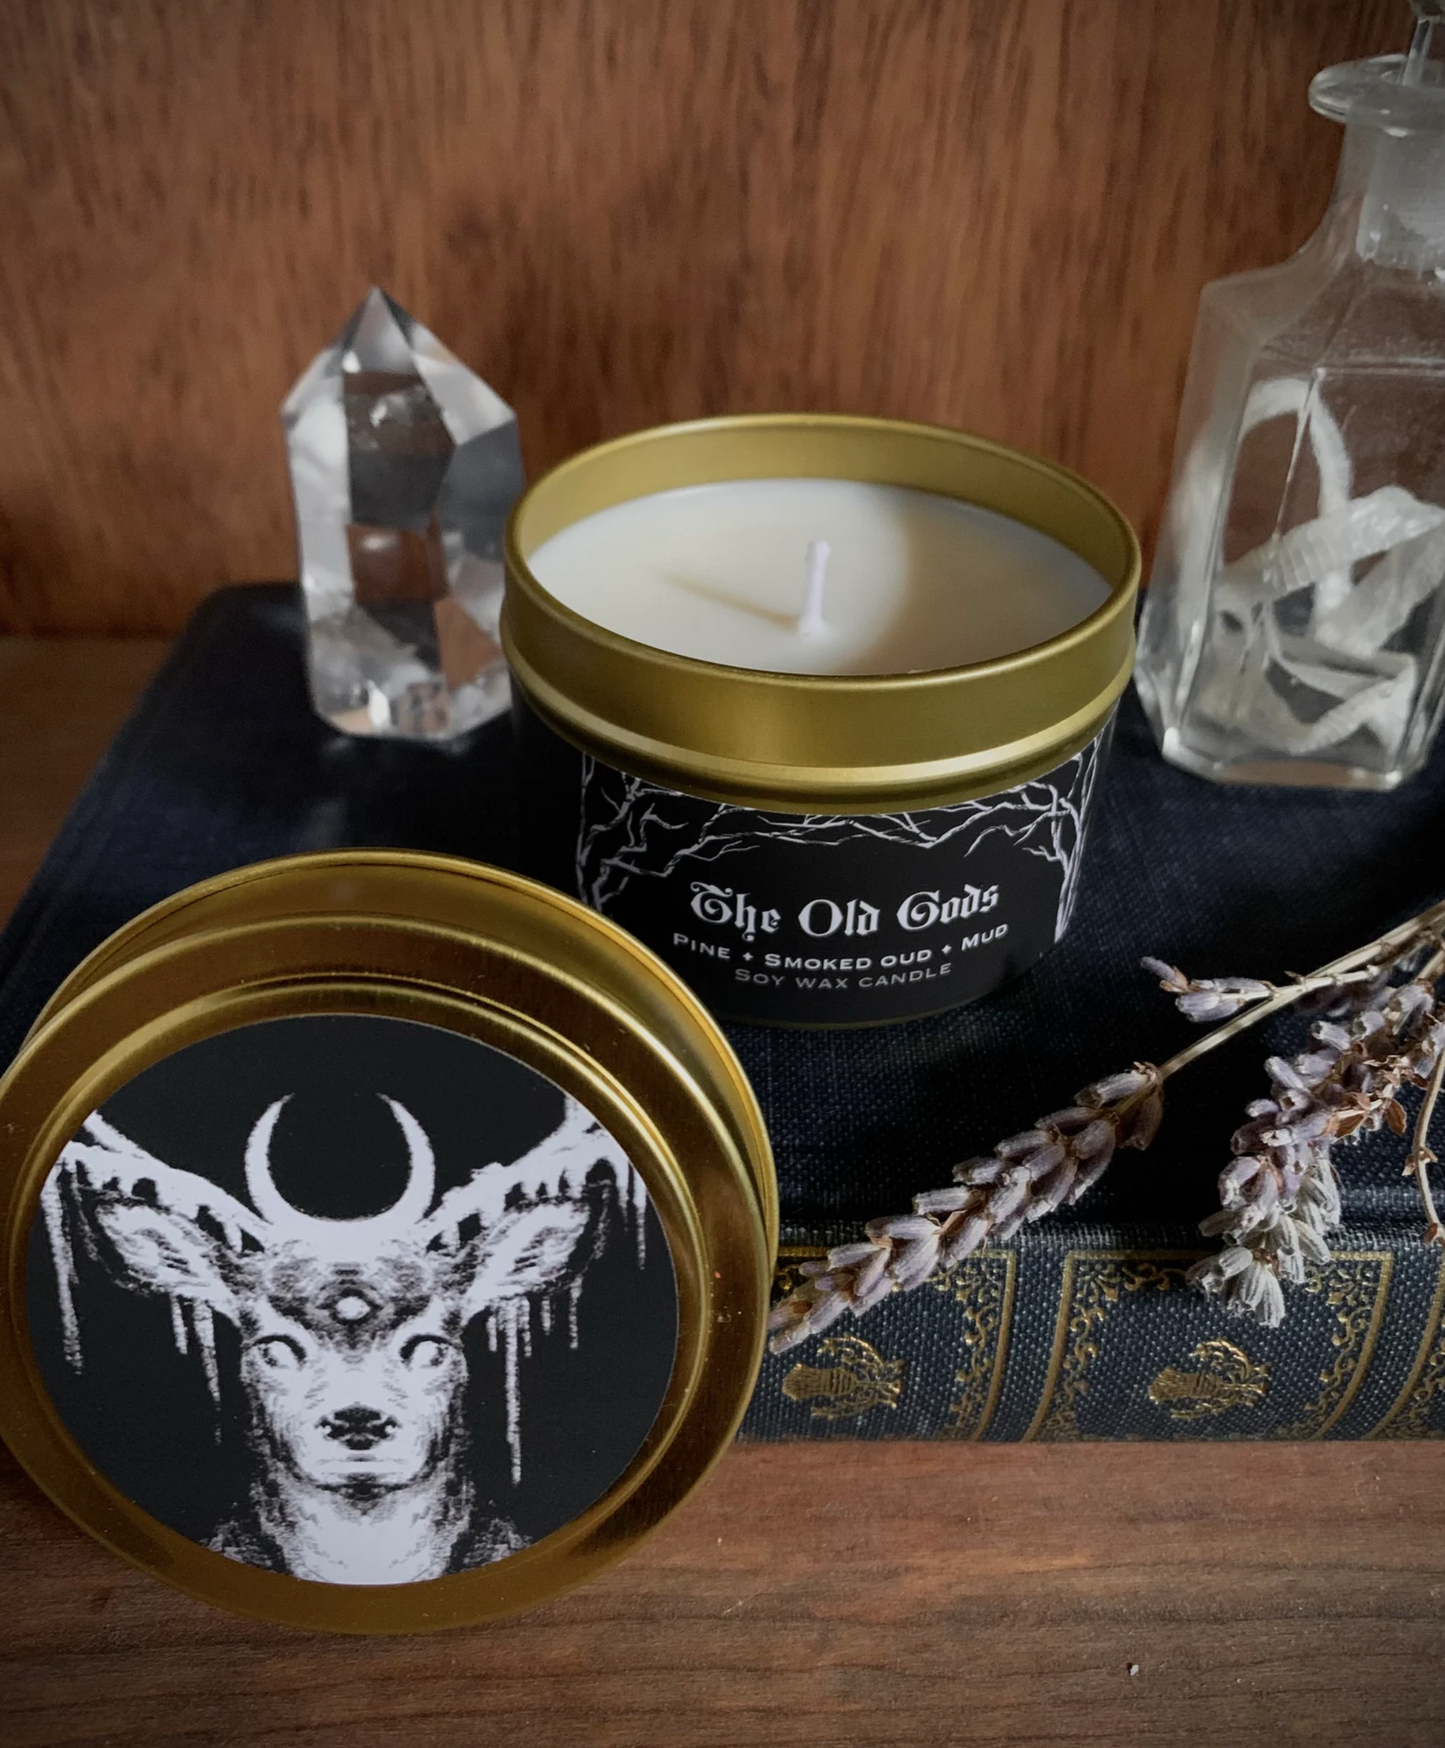 The Old Gods 4oz soy candle